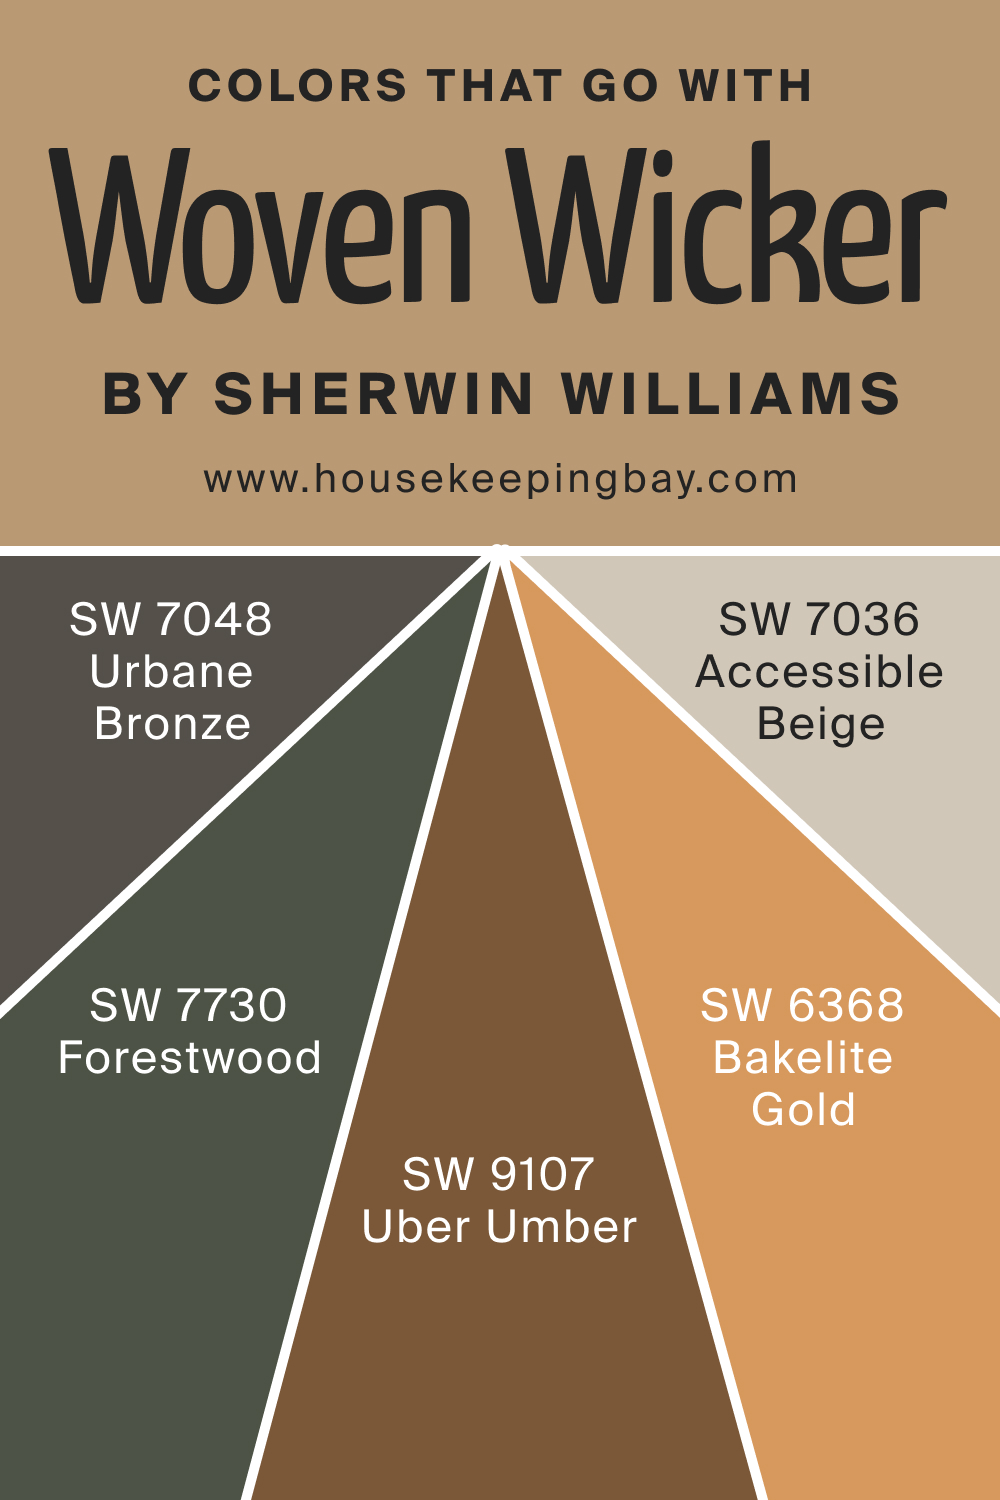 Colors that goes with SW 9104 Woven Wicker by Sherwin Williams